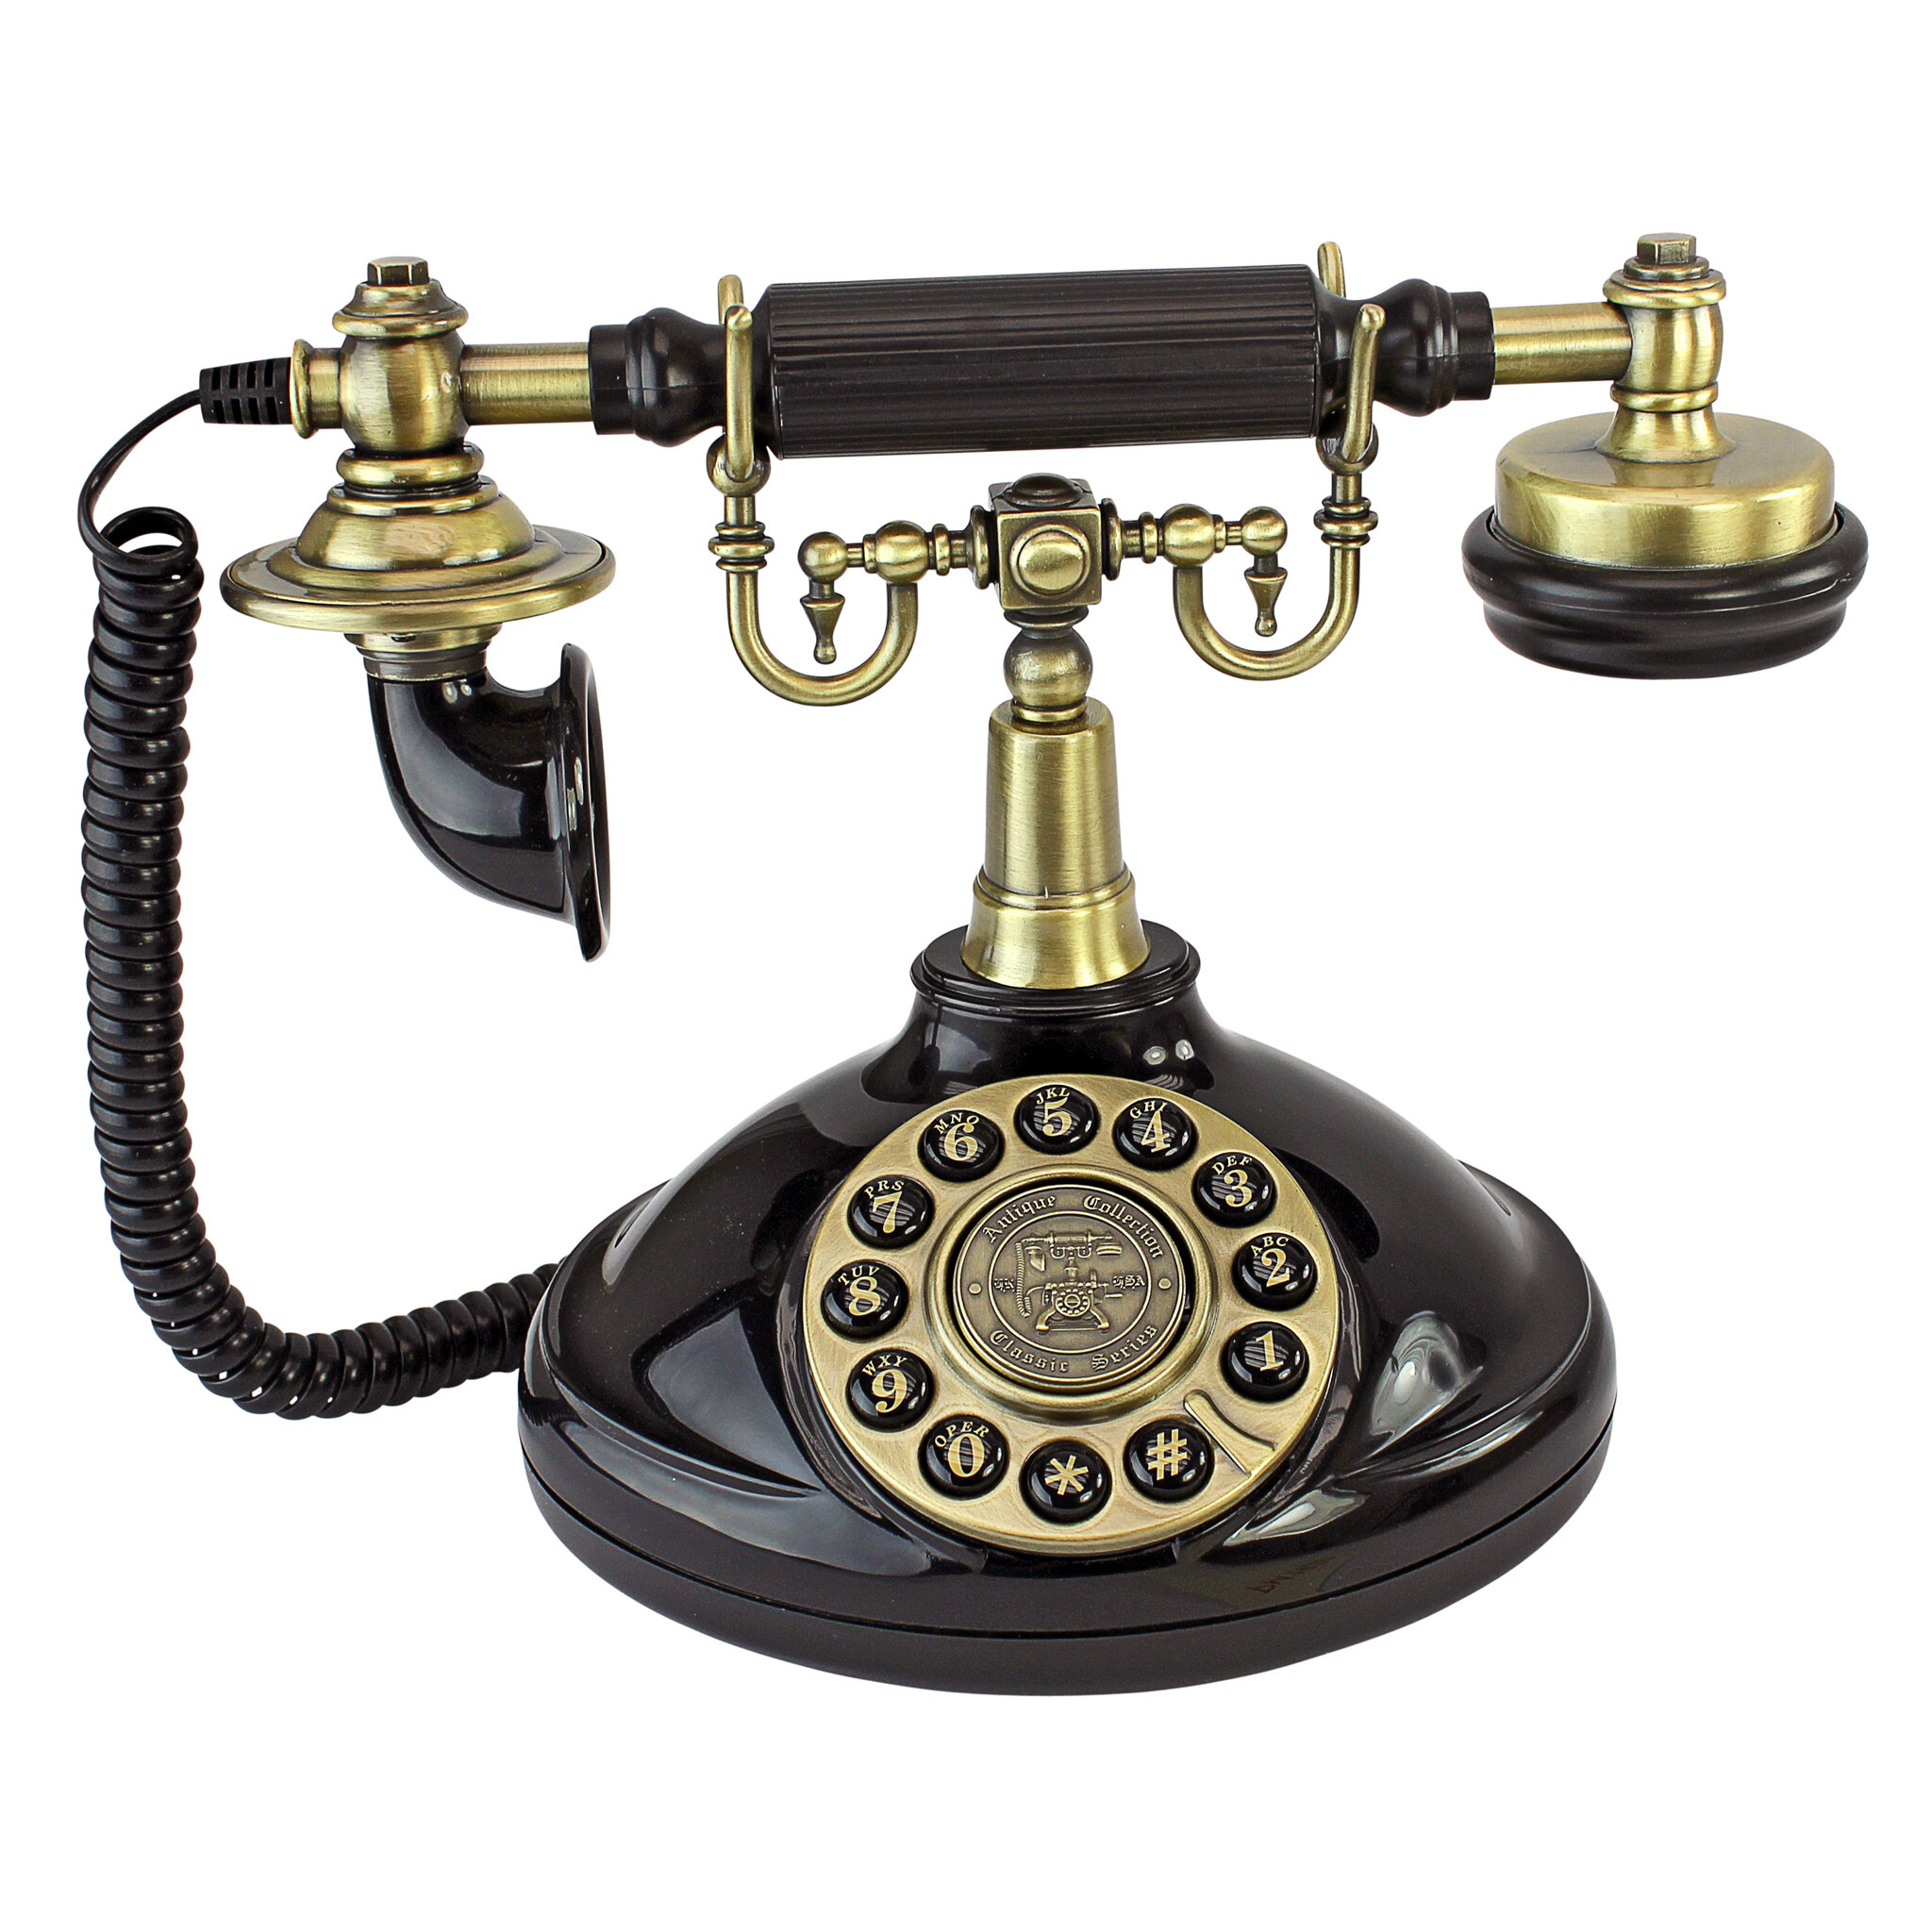 Rotary Dial Corded Telephone